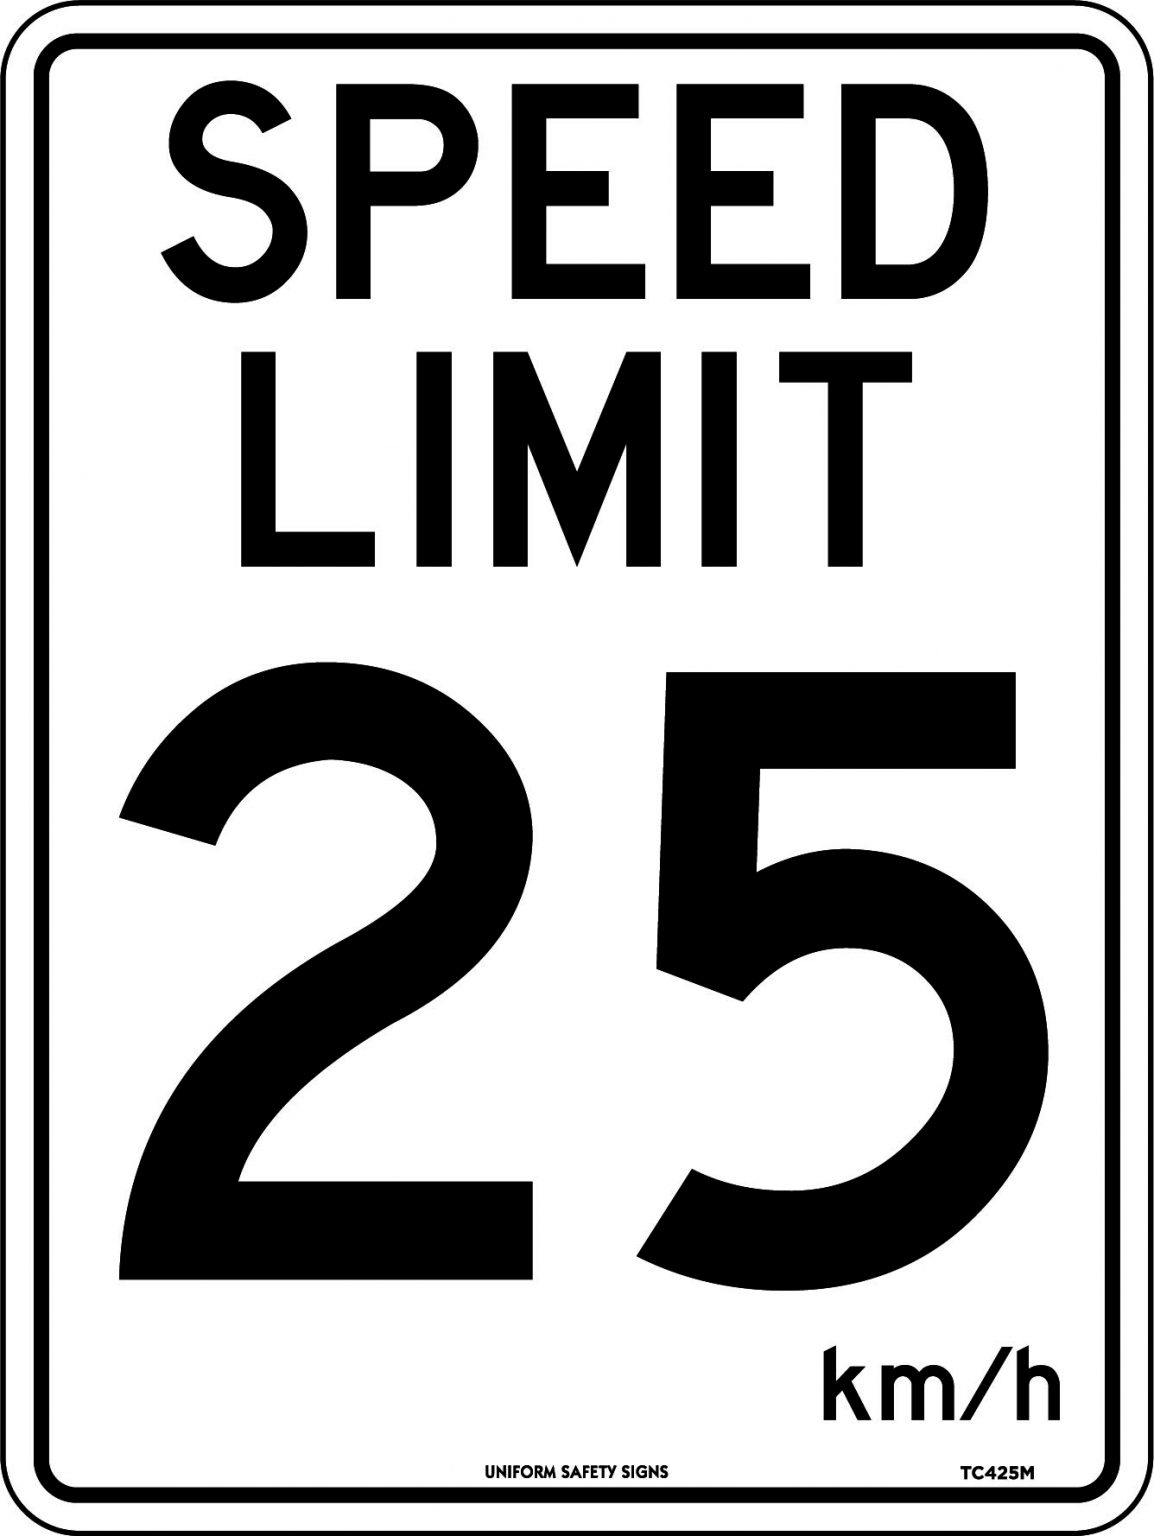 when were speed limits created